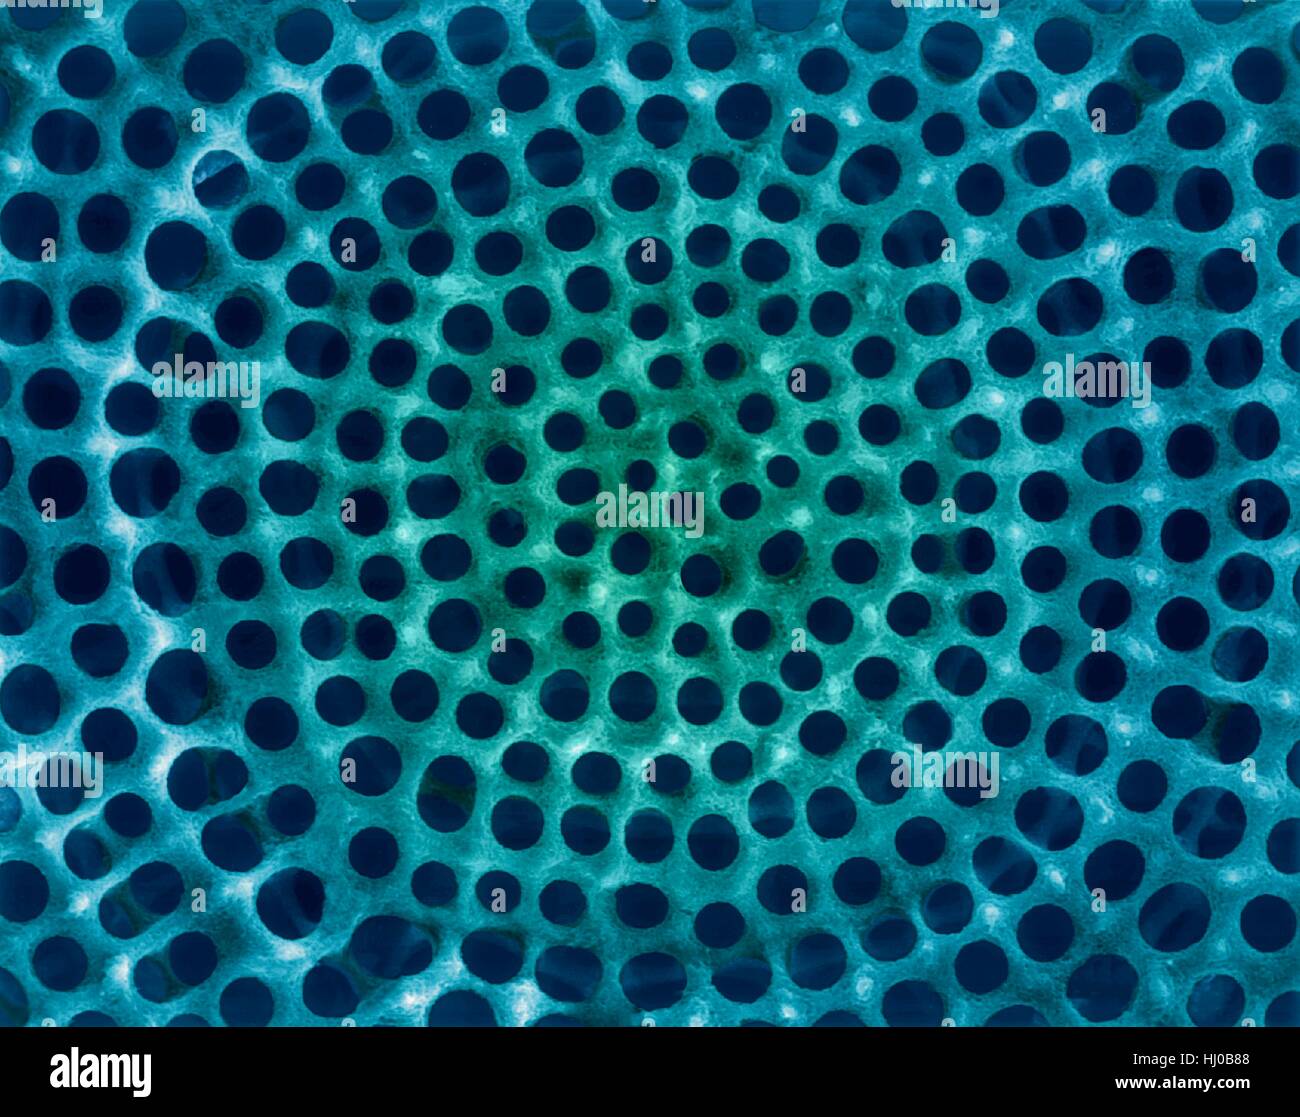 Radiolarian test (marine),coloured scanning electron micrograph (SEM).The hard skeleton surface is composed of silica or strontium sulphate.The Radiolaria (also called Radiozoa) are protozoa that produce intricate mineral skeletons.They are found as zooplankton throughout ocean their skeletal Stock Photo